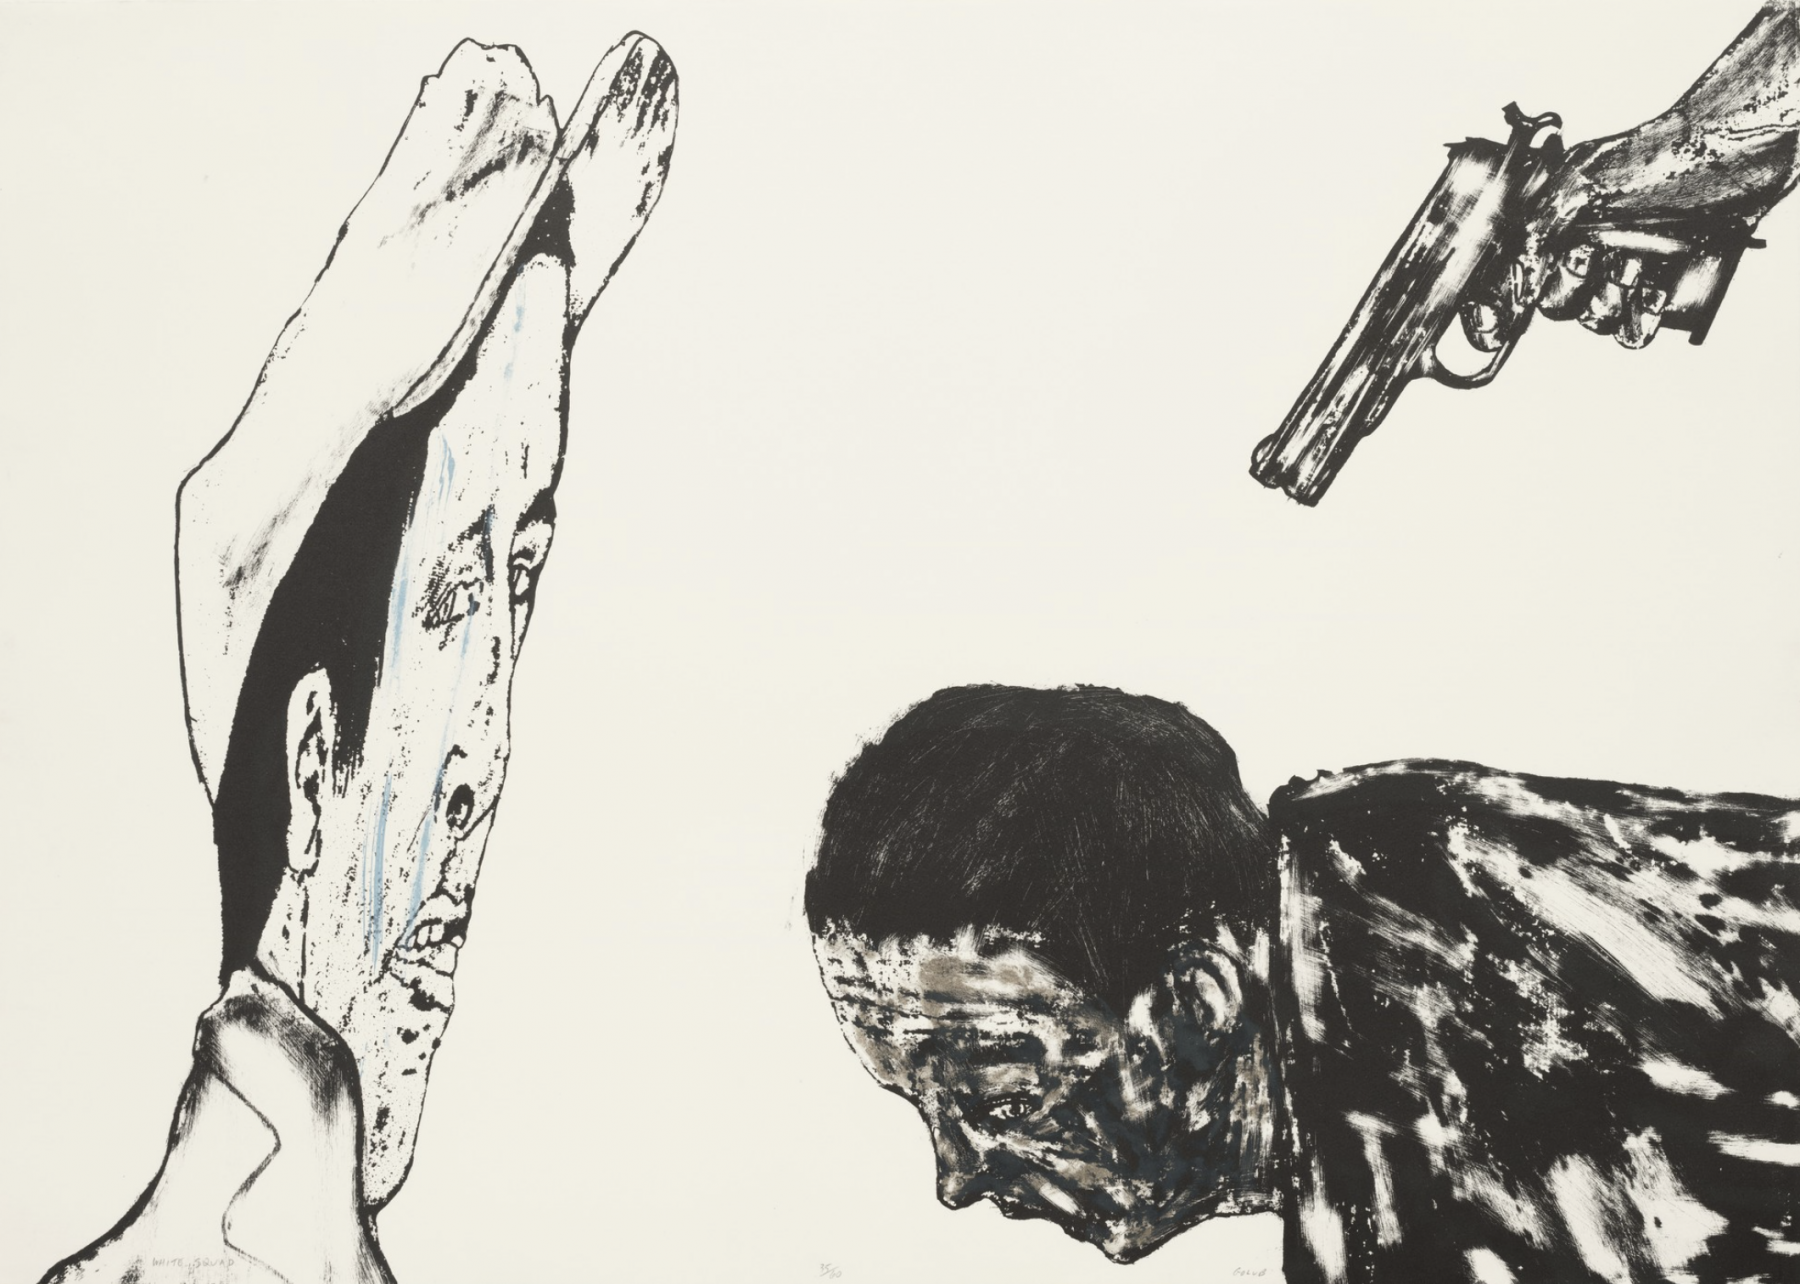 Leon Golub, White Squad, 1987,&nbsp;Lithograph, 29.5 x 41.5 inches
Courtesy of the Museum of Modern Art